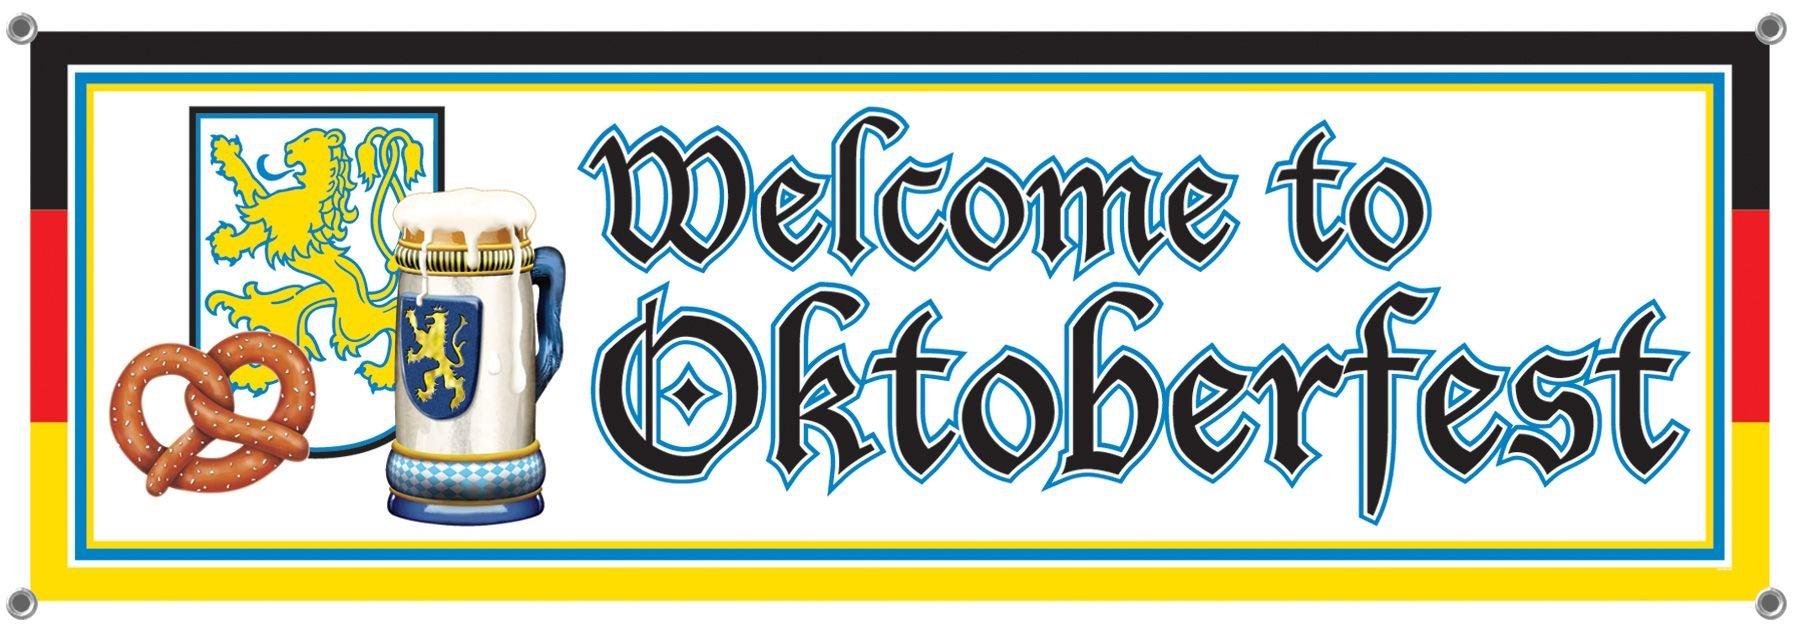 Welcome to Oktoberfest Banner